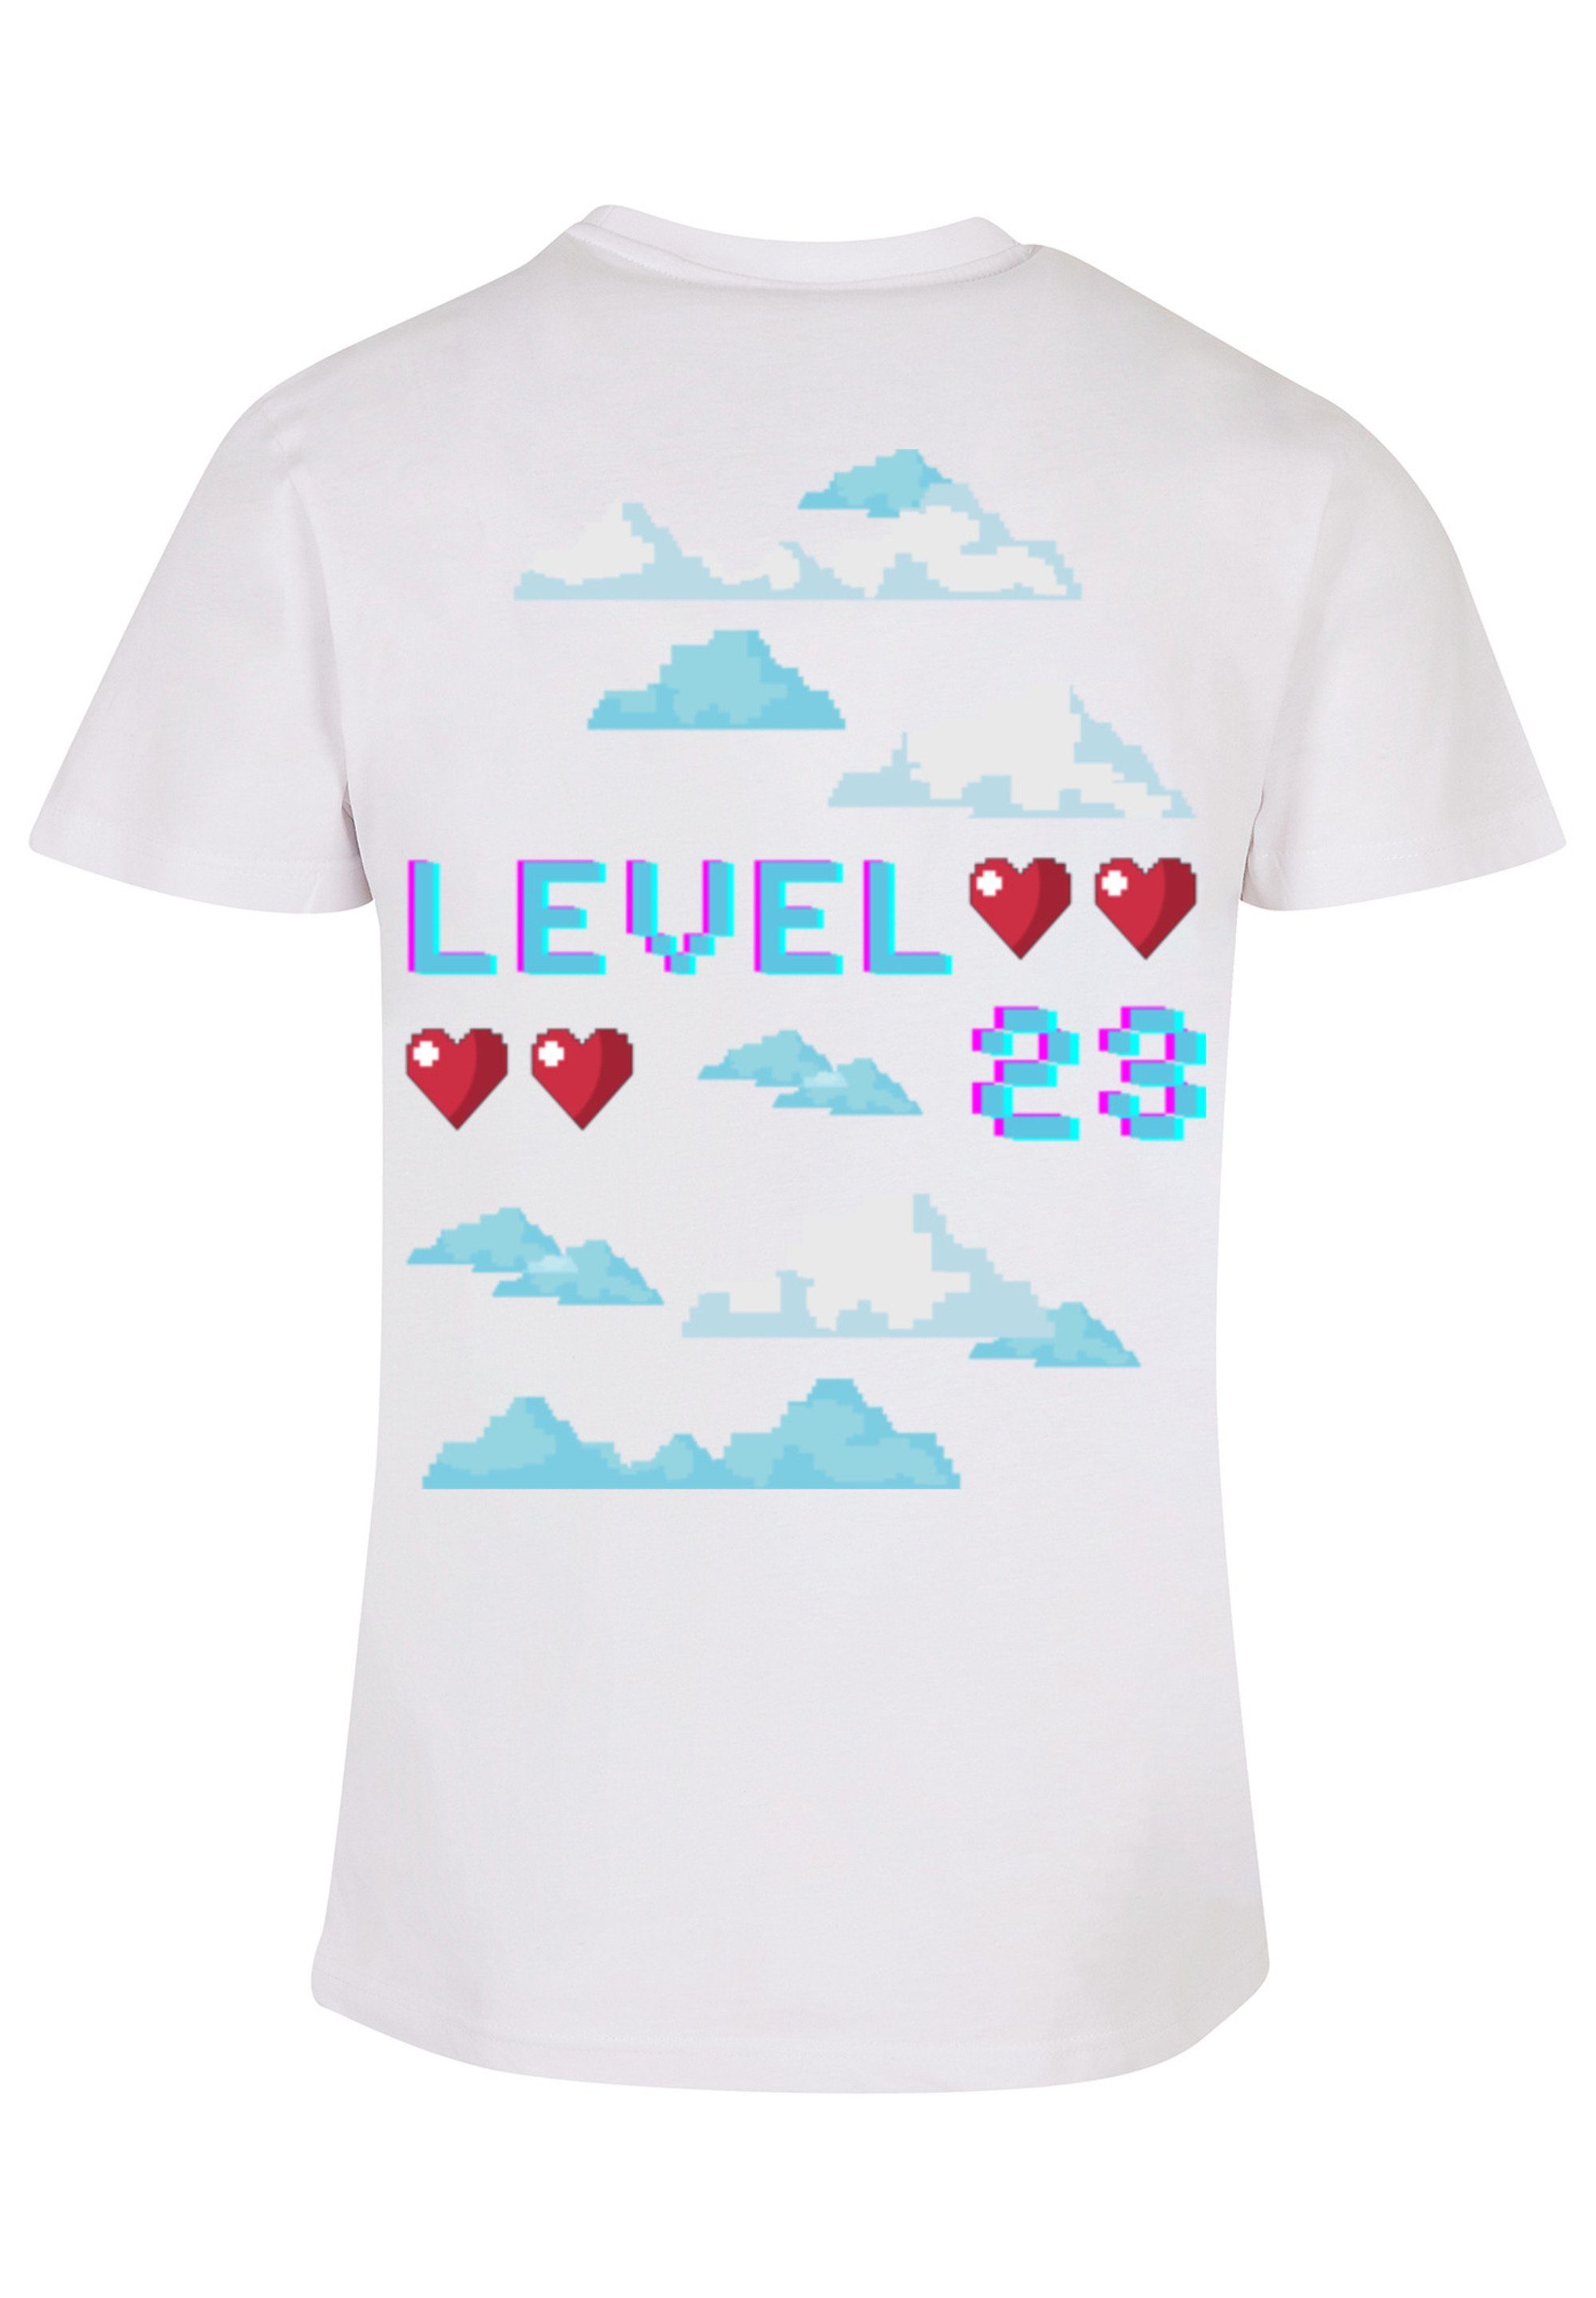 23 Up New F4NT4STIC Level T-Shirt Year Front Print Happy